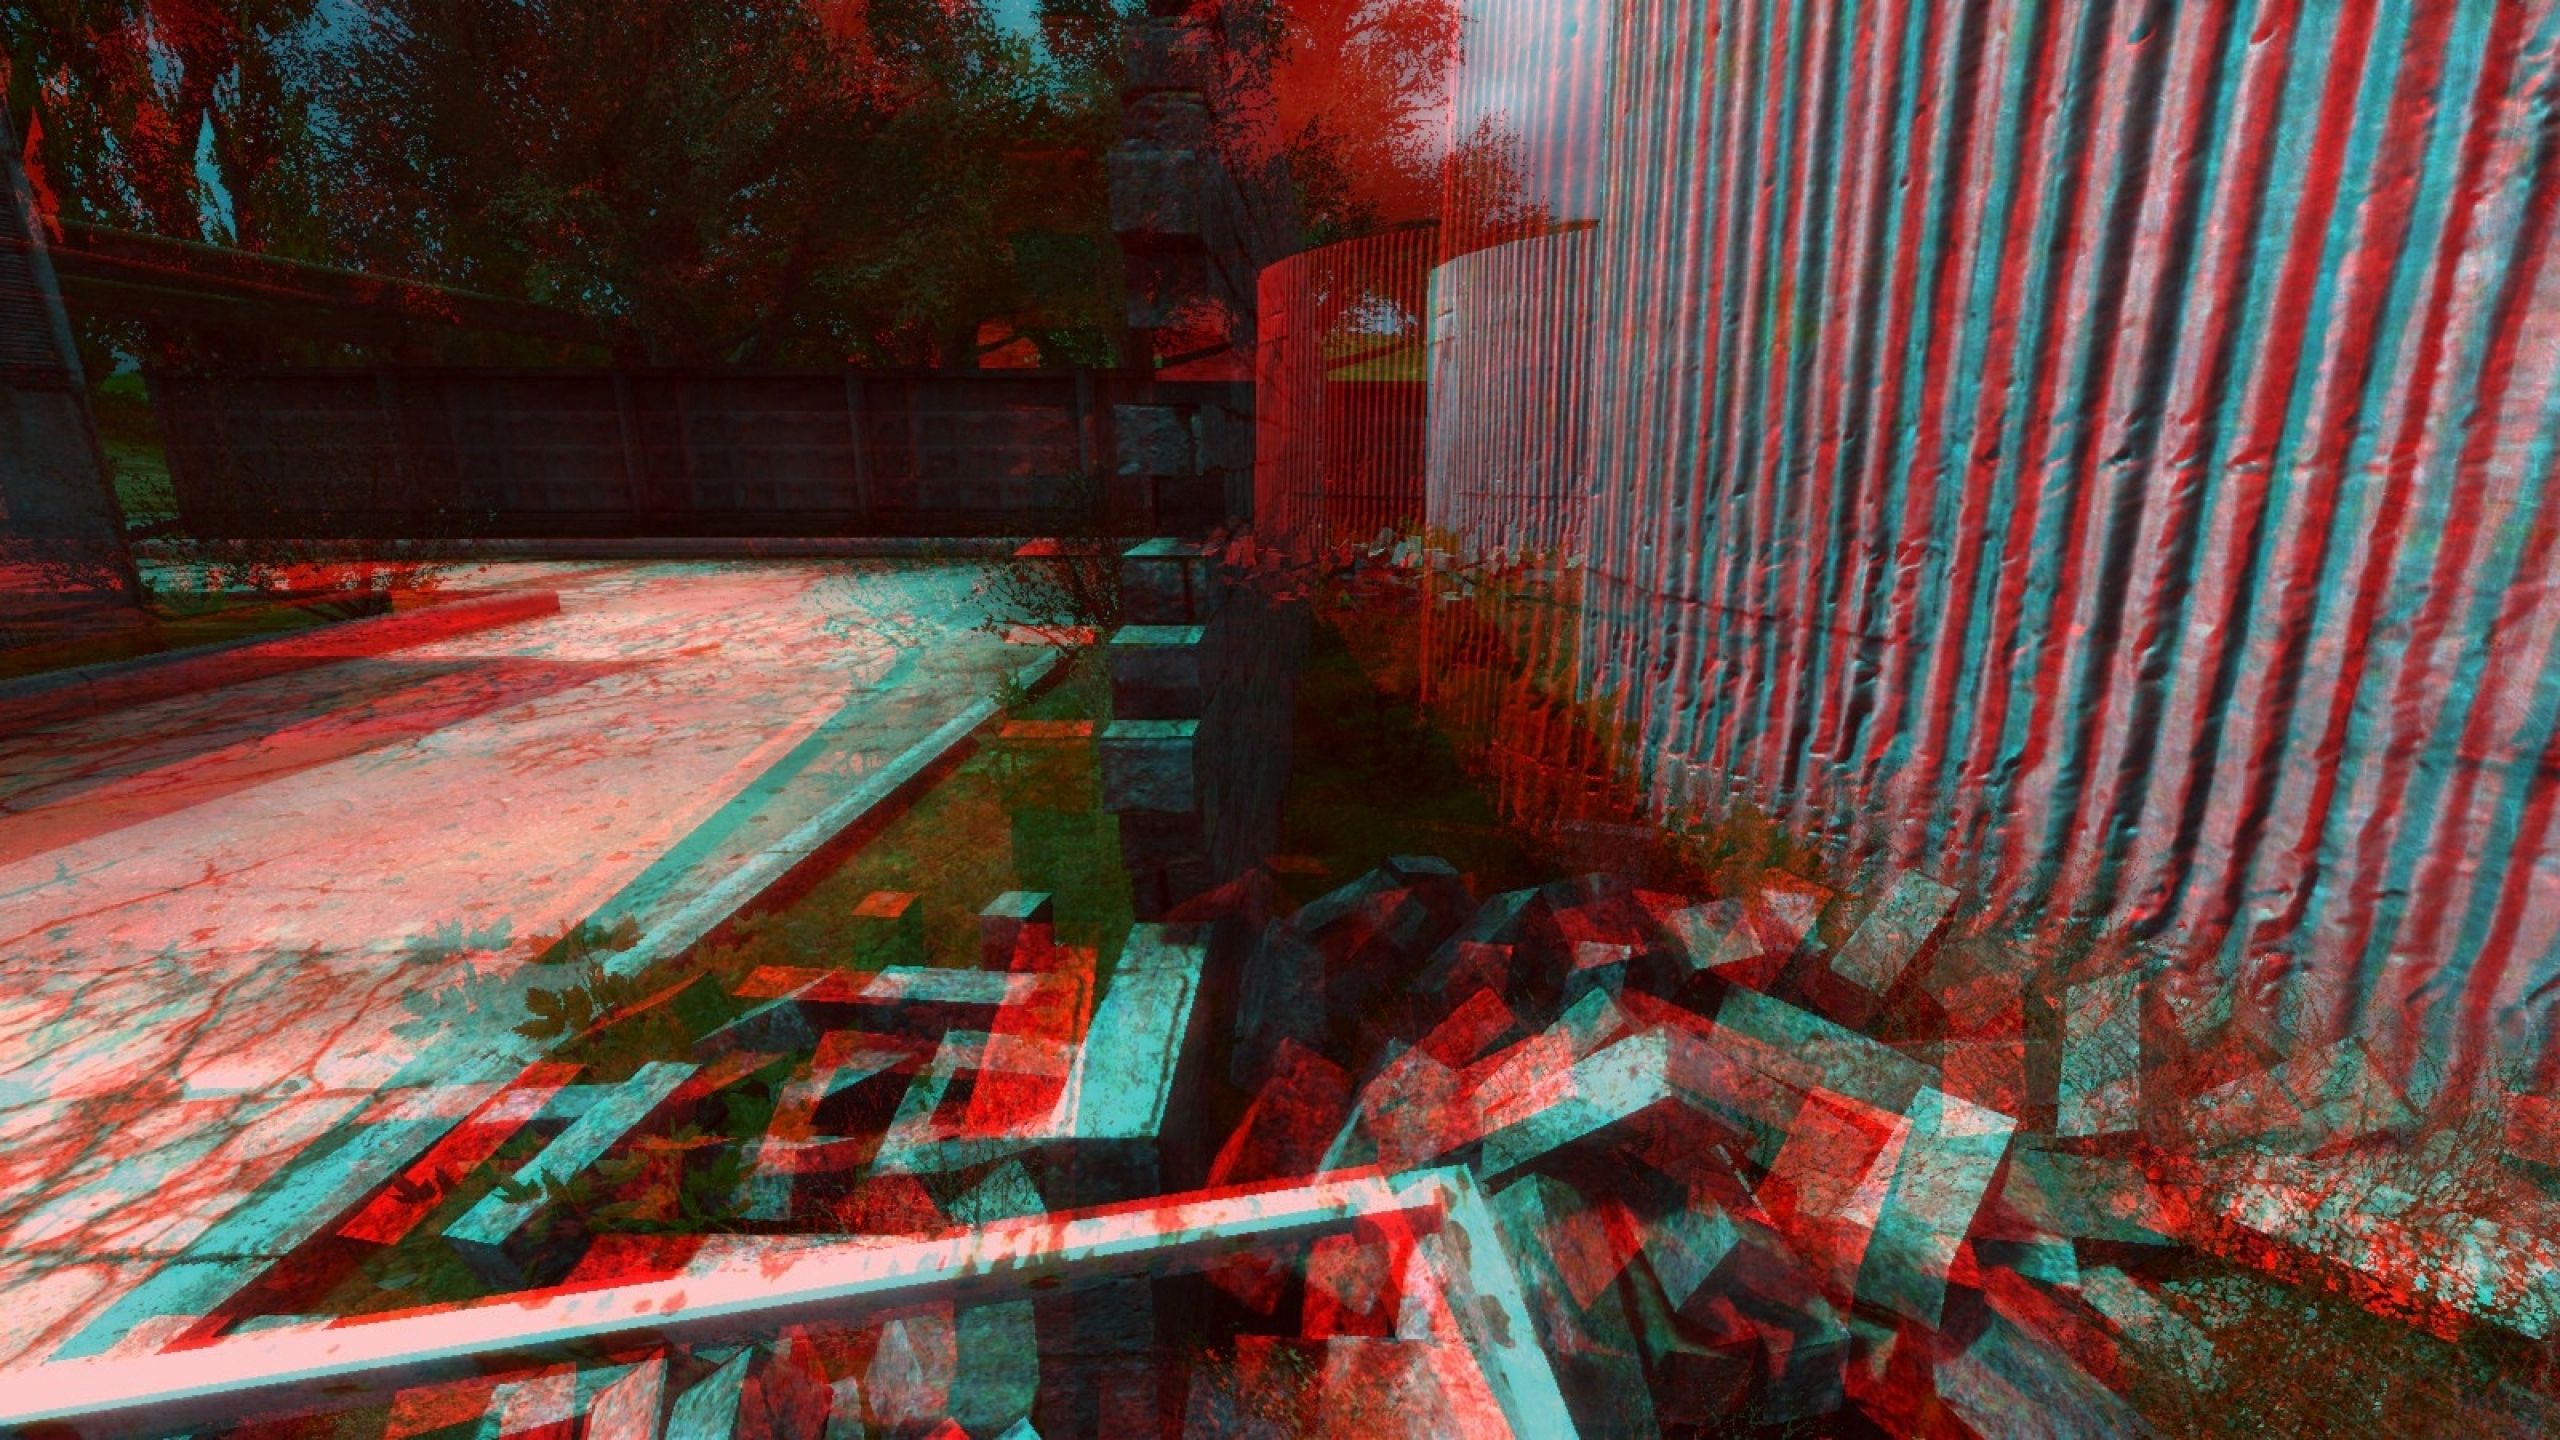 Wallpaper for mobile devices red, 3d, wall, anaglyph